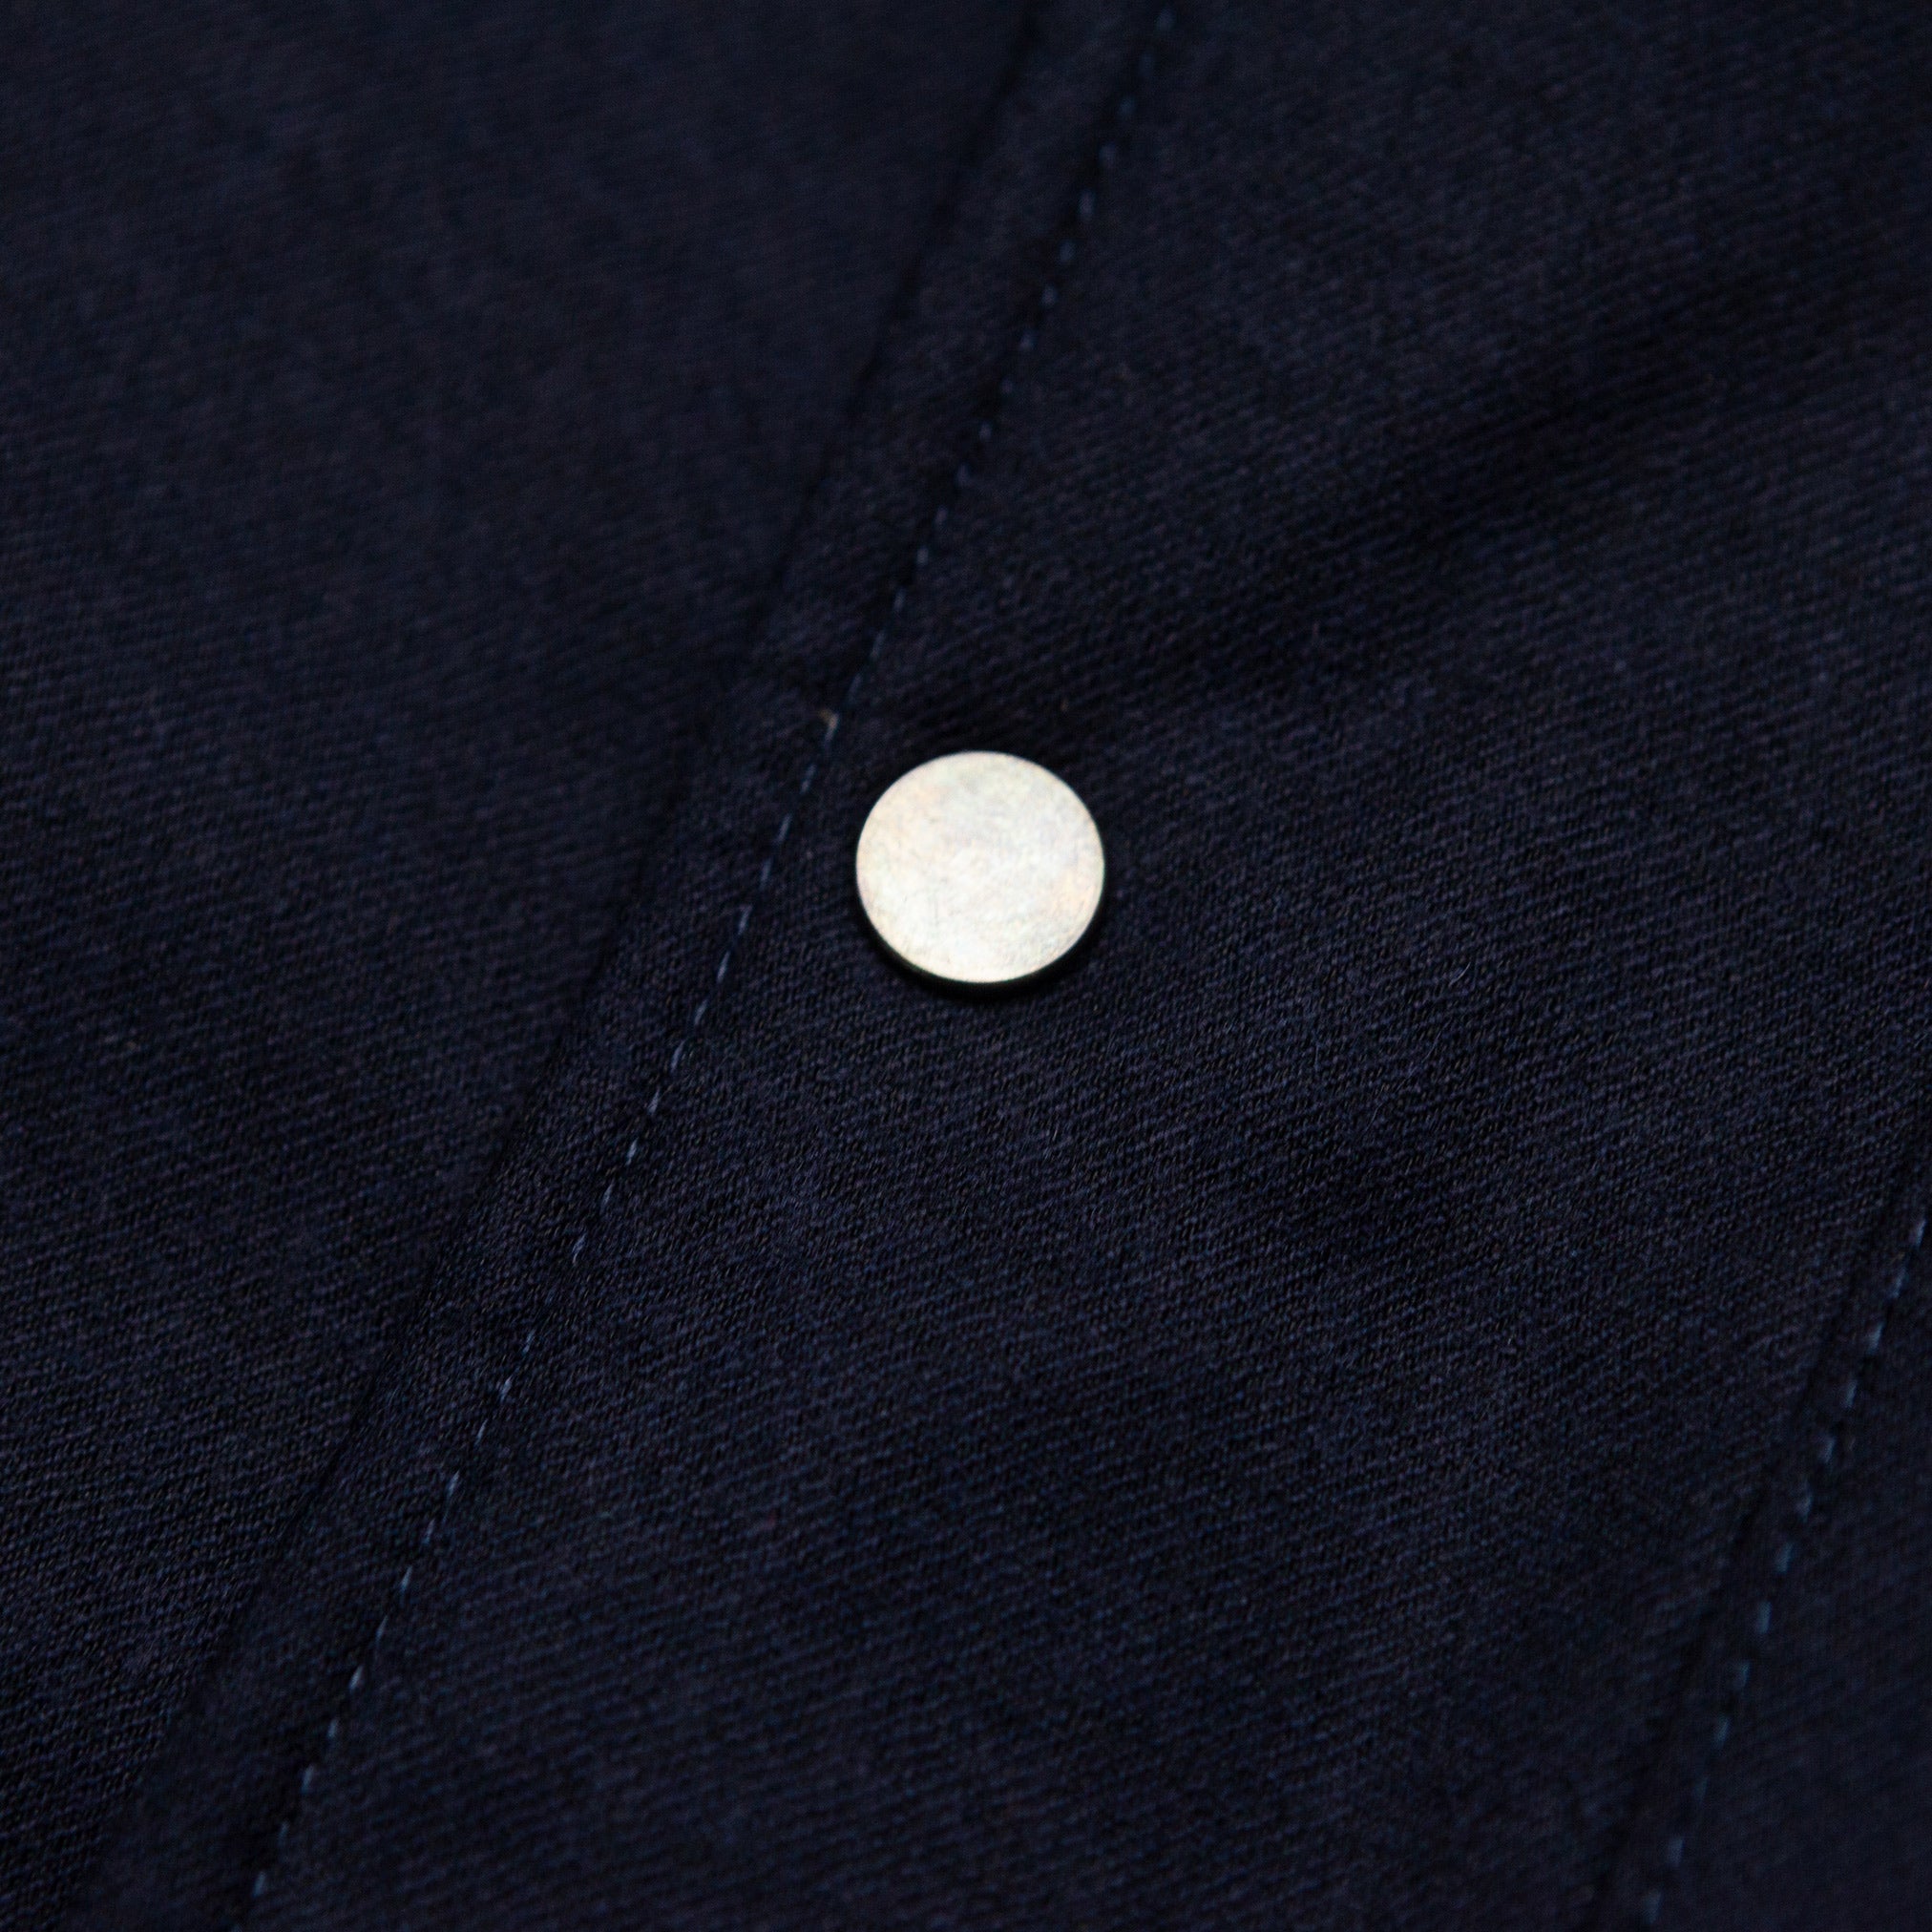 Lined Tyrol Shirt Jacket in Navy Wool